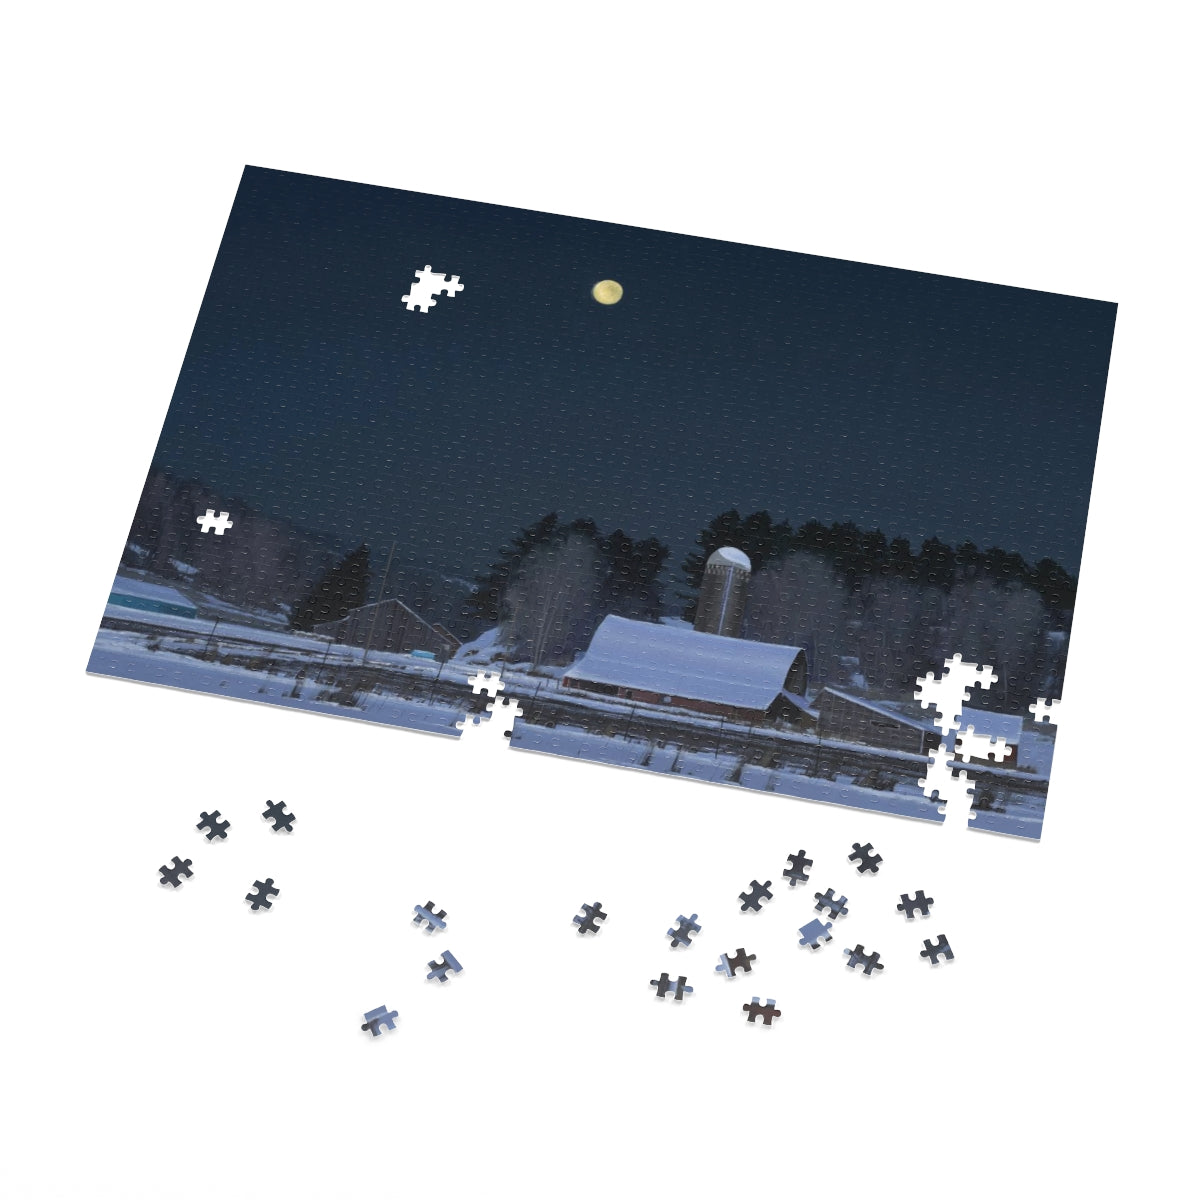 Puzzle - Ben Bauer 's Moonset, 7 Minutes to Sun Up